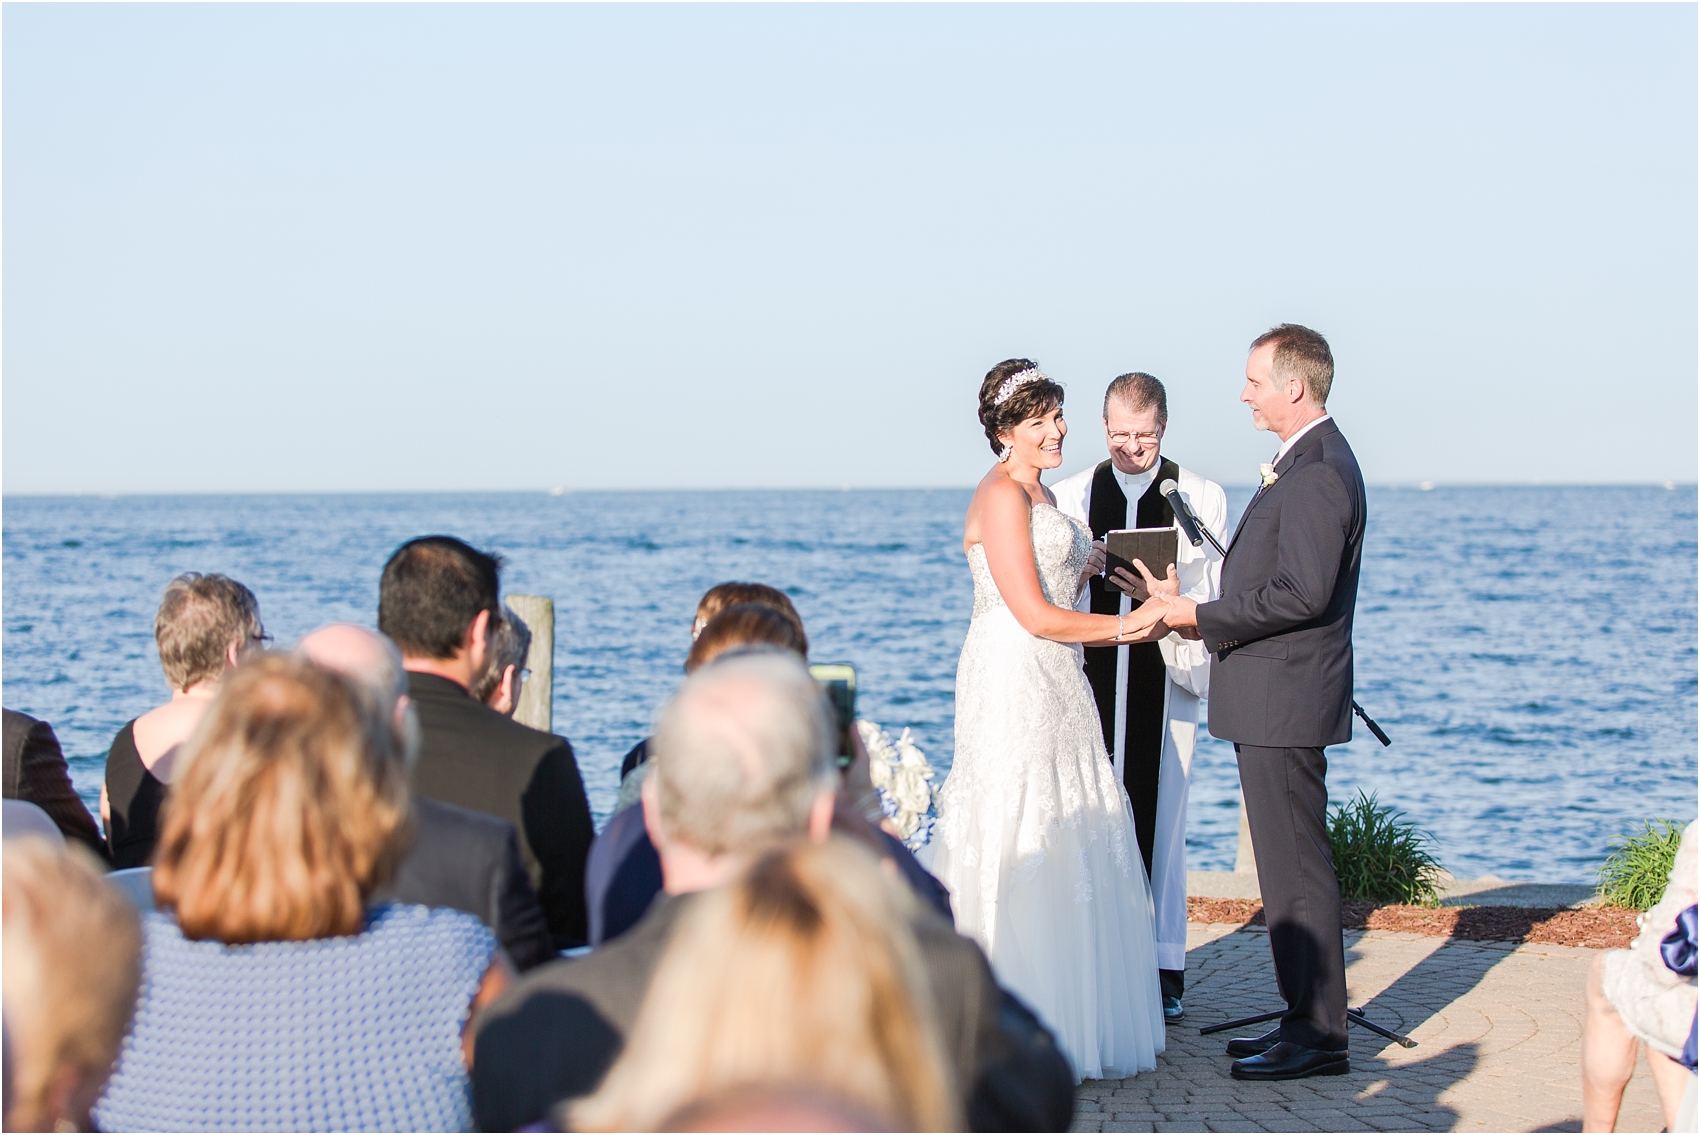 classic-natuical-inspired-wedding-photos-on-infinity-ovation-yacht-in-st-clair-shores-mi-by-courtney-carolyn-photography_0047.jpg